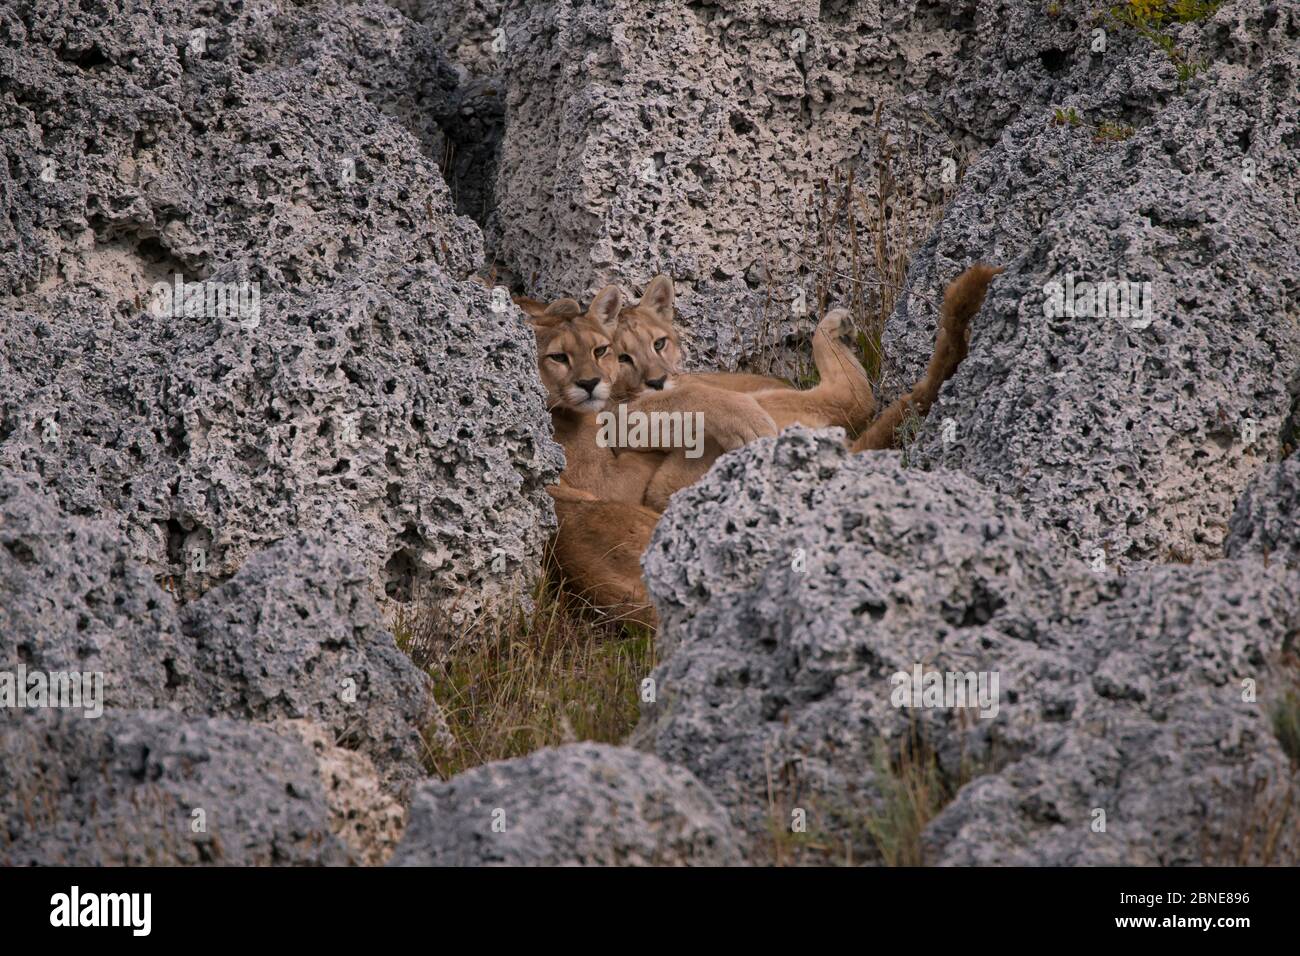 Puma (Puma concolor) family of juveniles resting together in crevice of rocks, Chile. Stock Photo